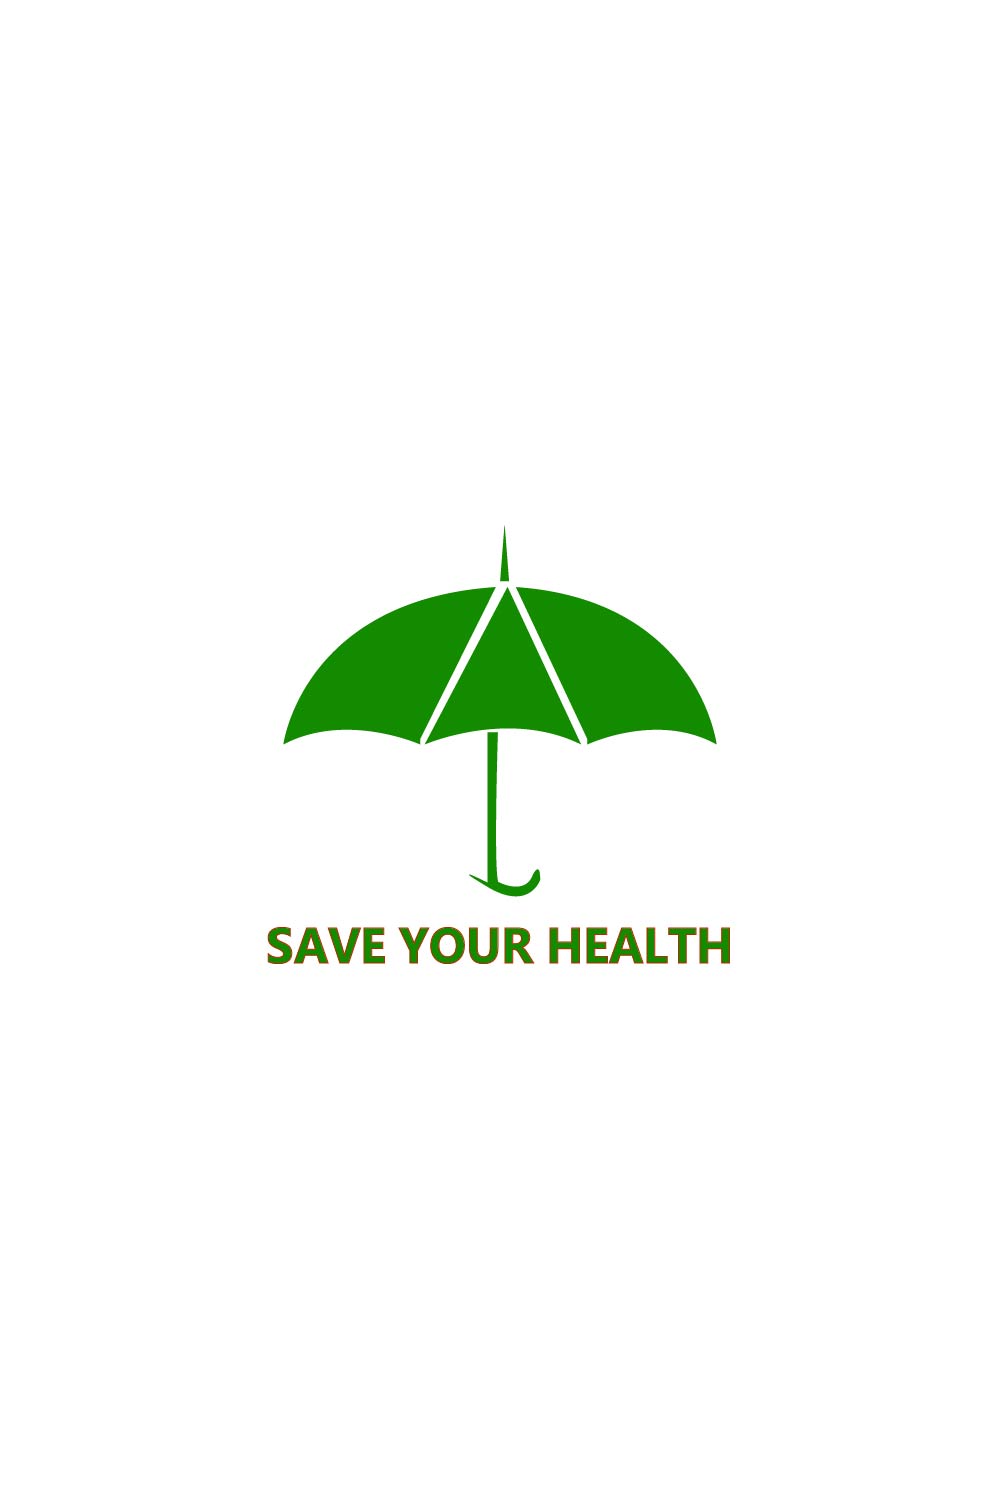 SAVE YOUR HEALTH pinterest preview image.